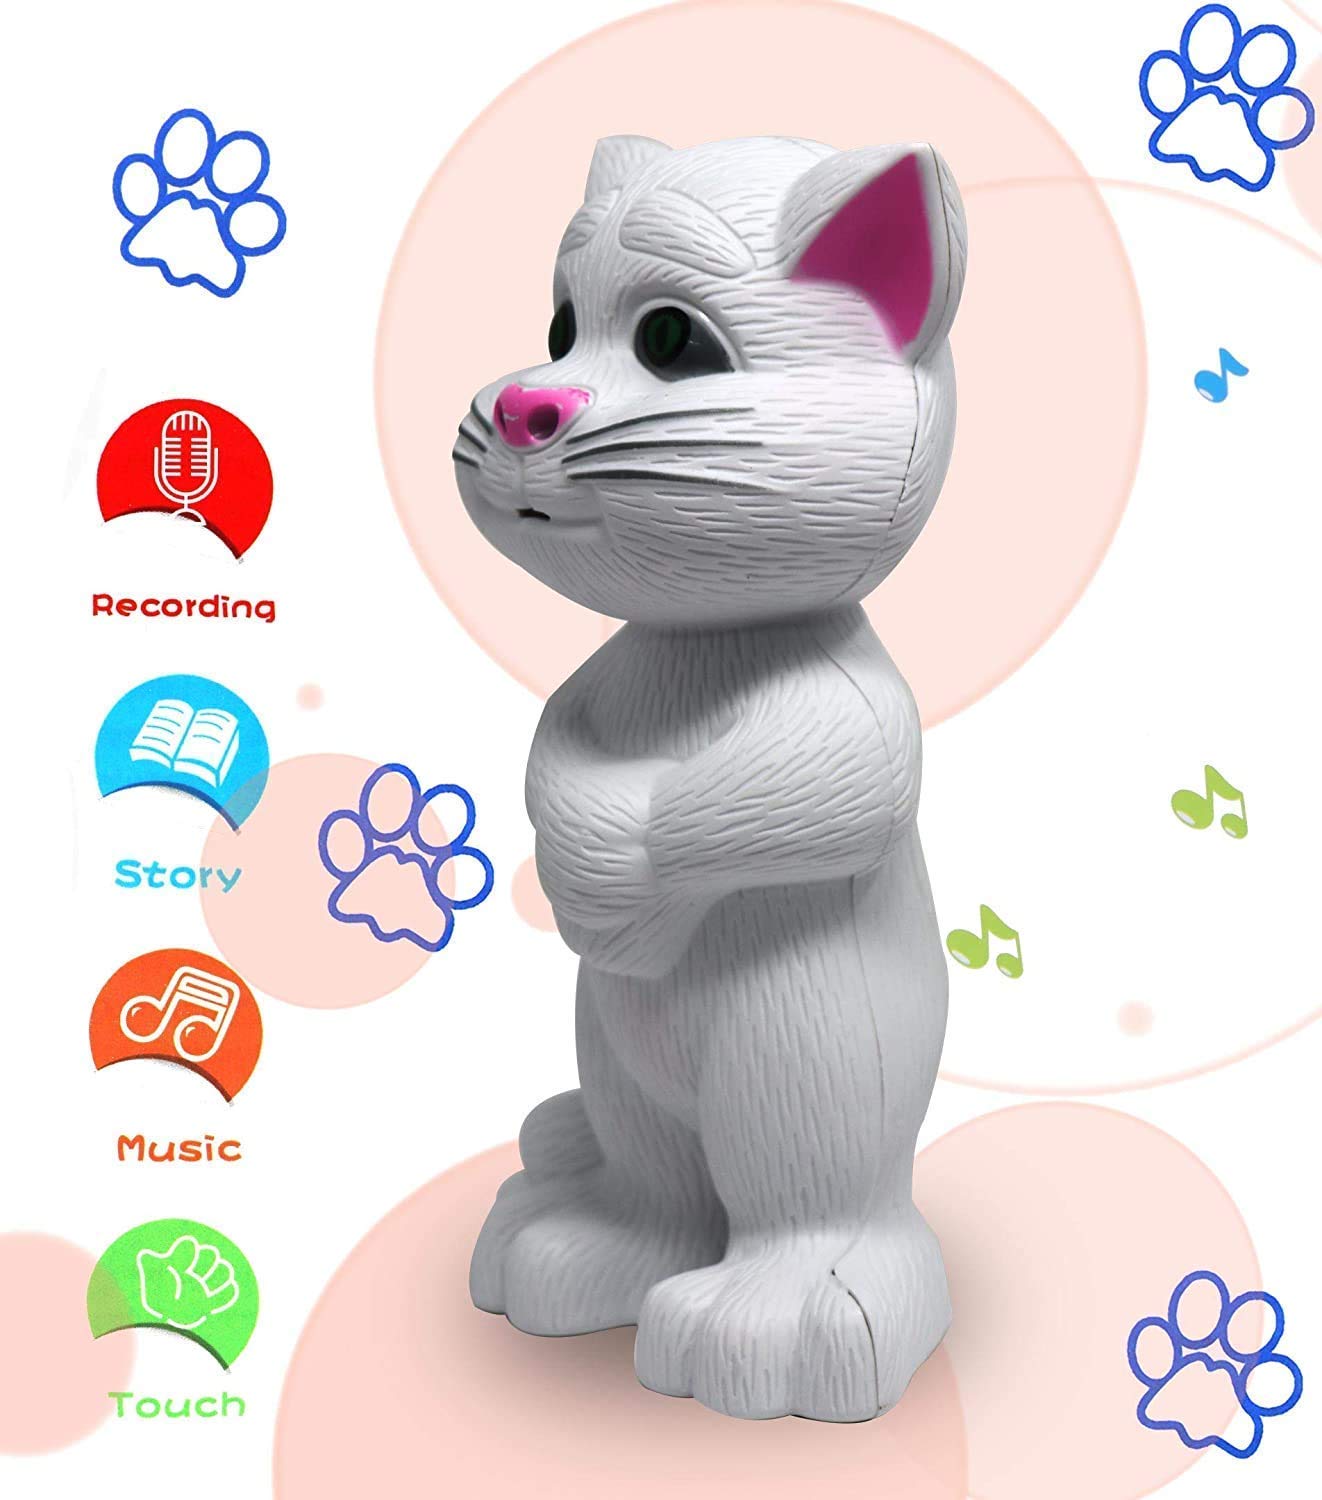 NHR Talking Tom Ca, Interactive Musical Toy (Choose Any Color)